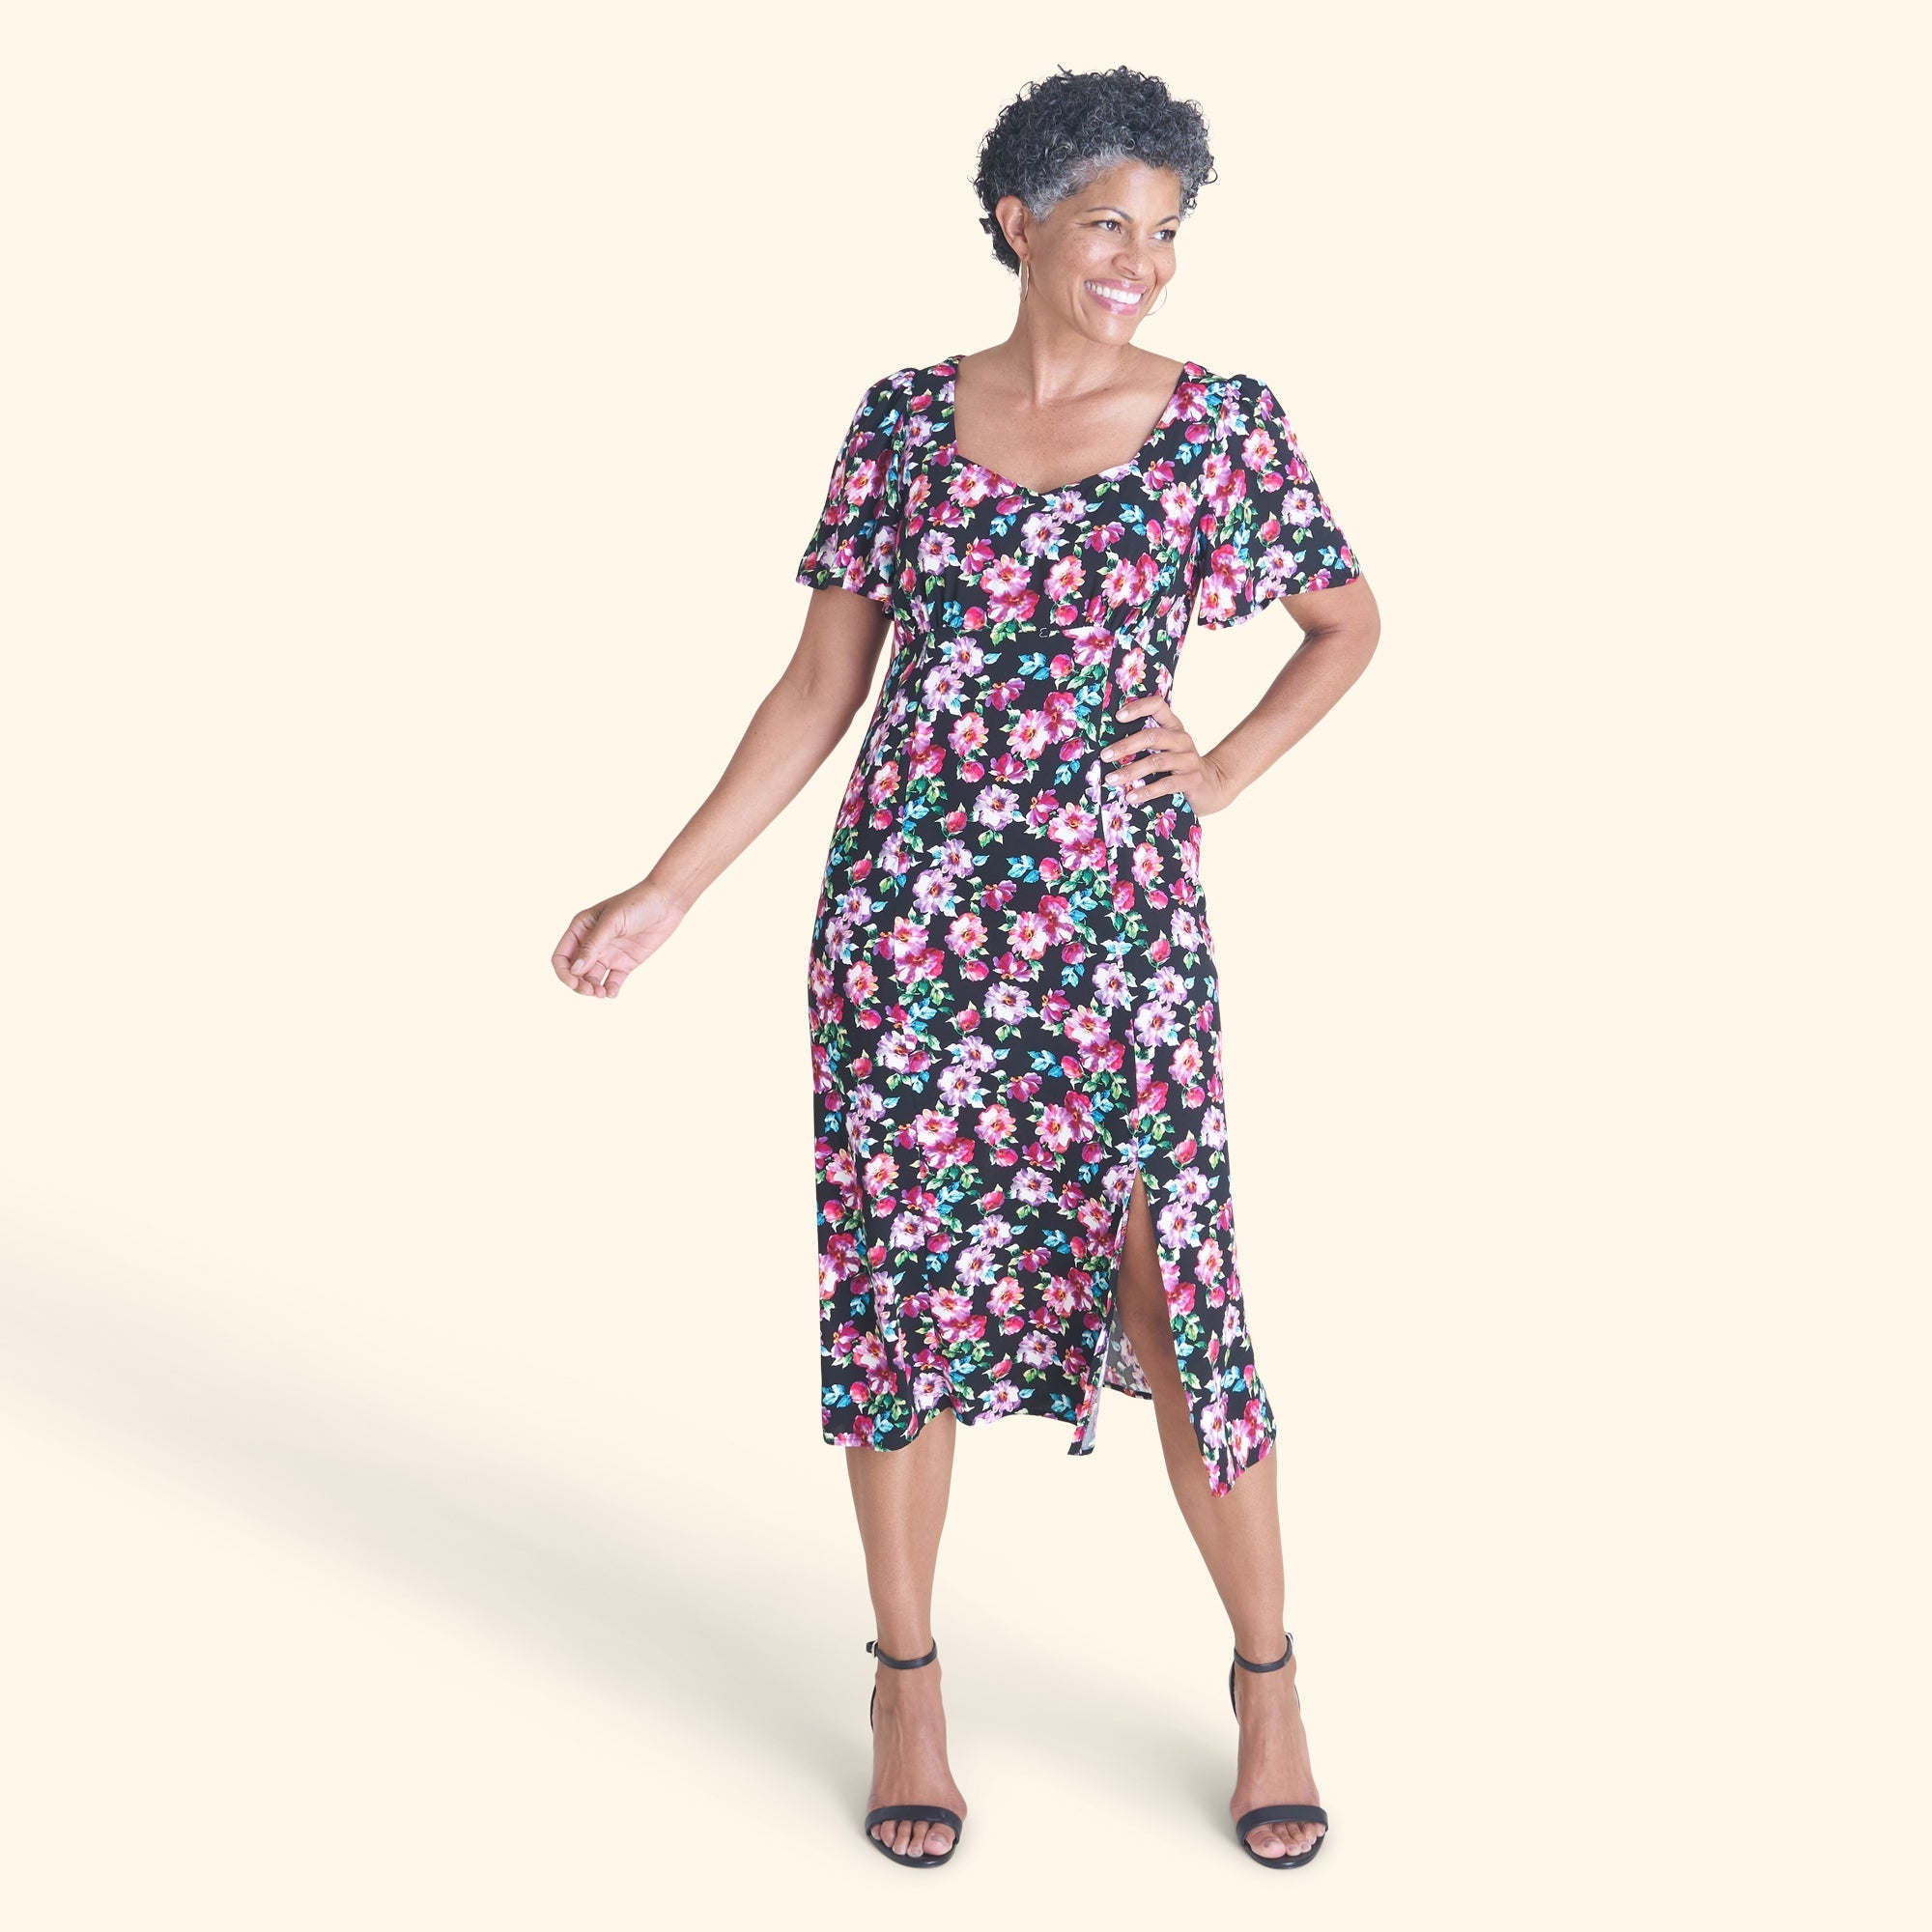 Woman posing wearing Black Adrian Floral Midi Dress from Connected Apparel